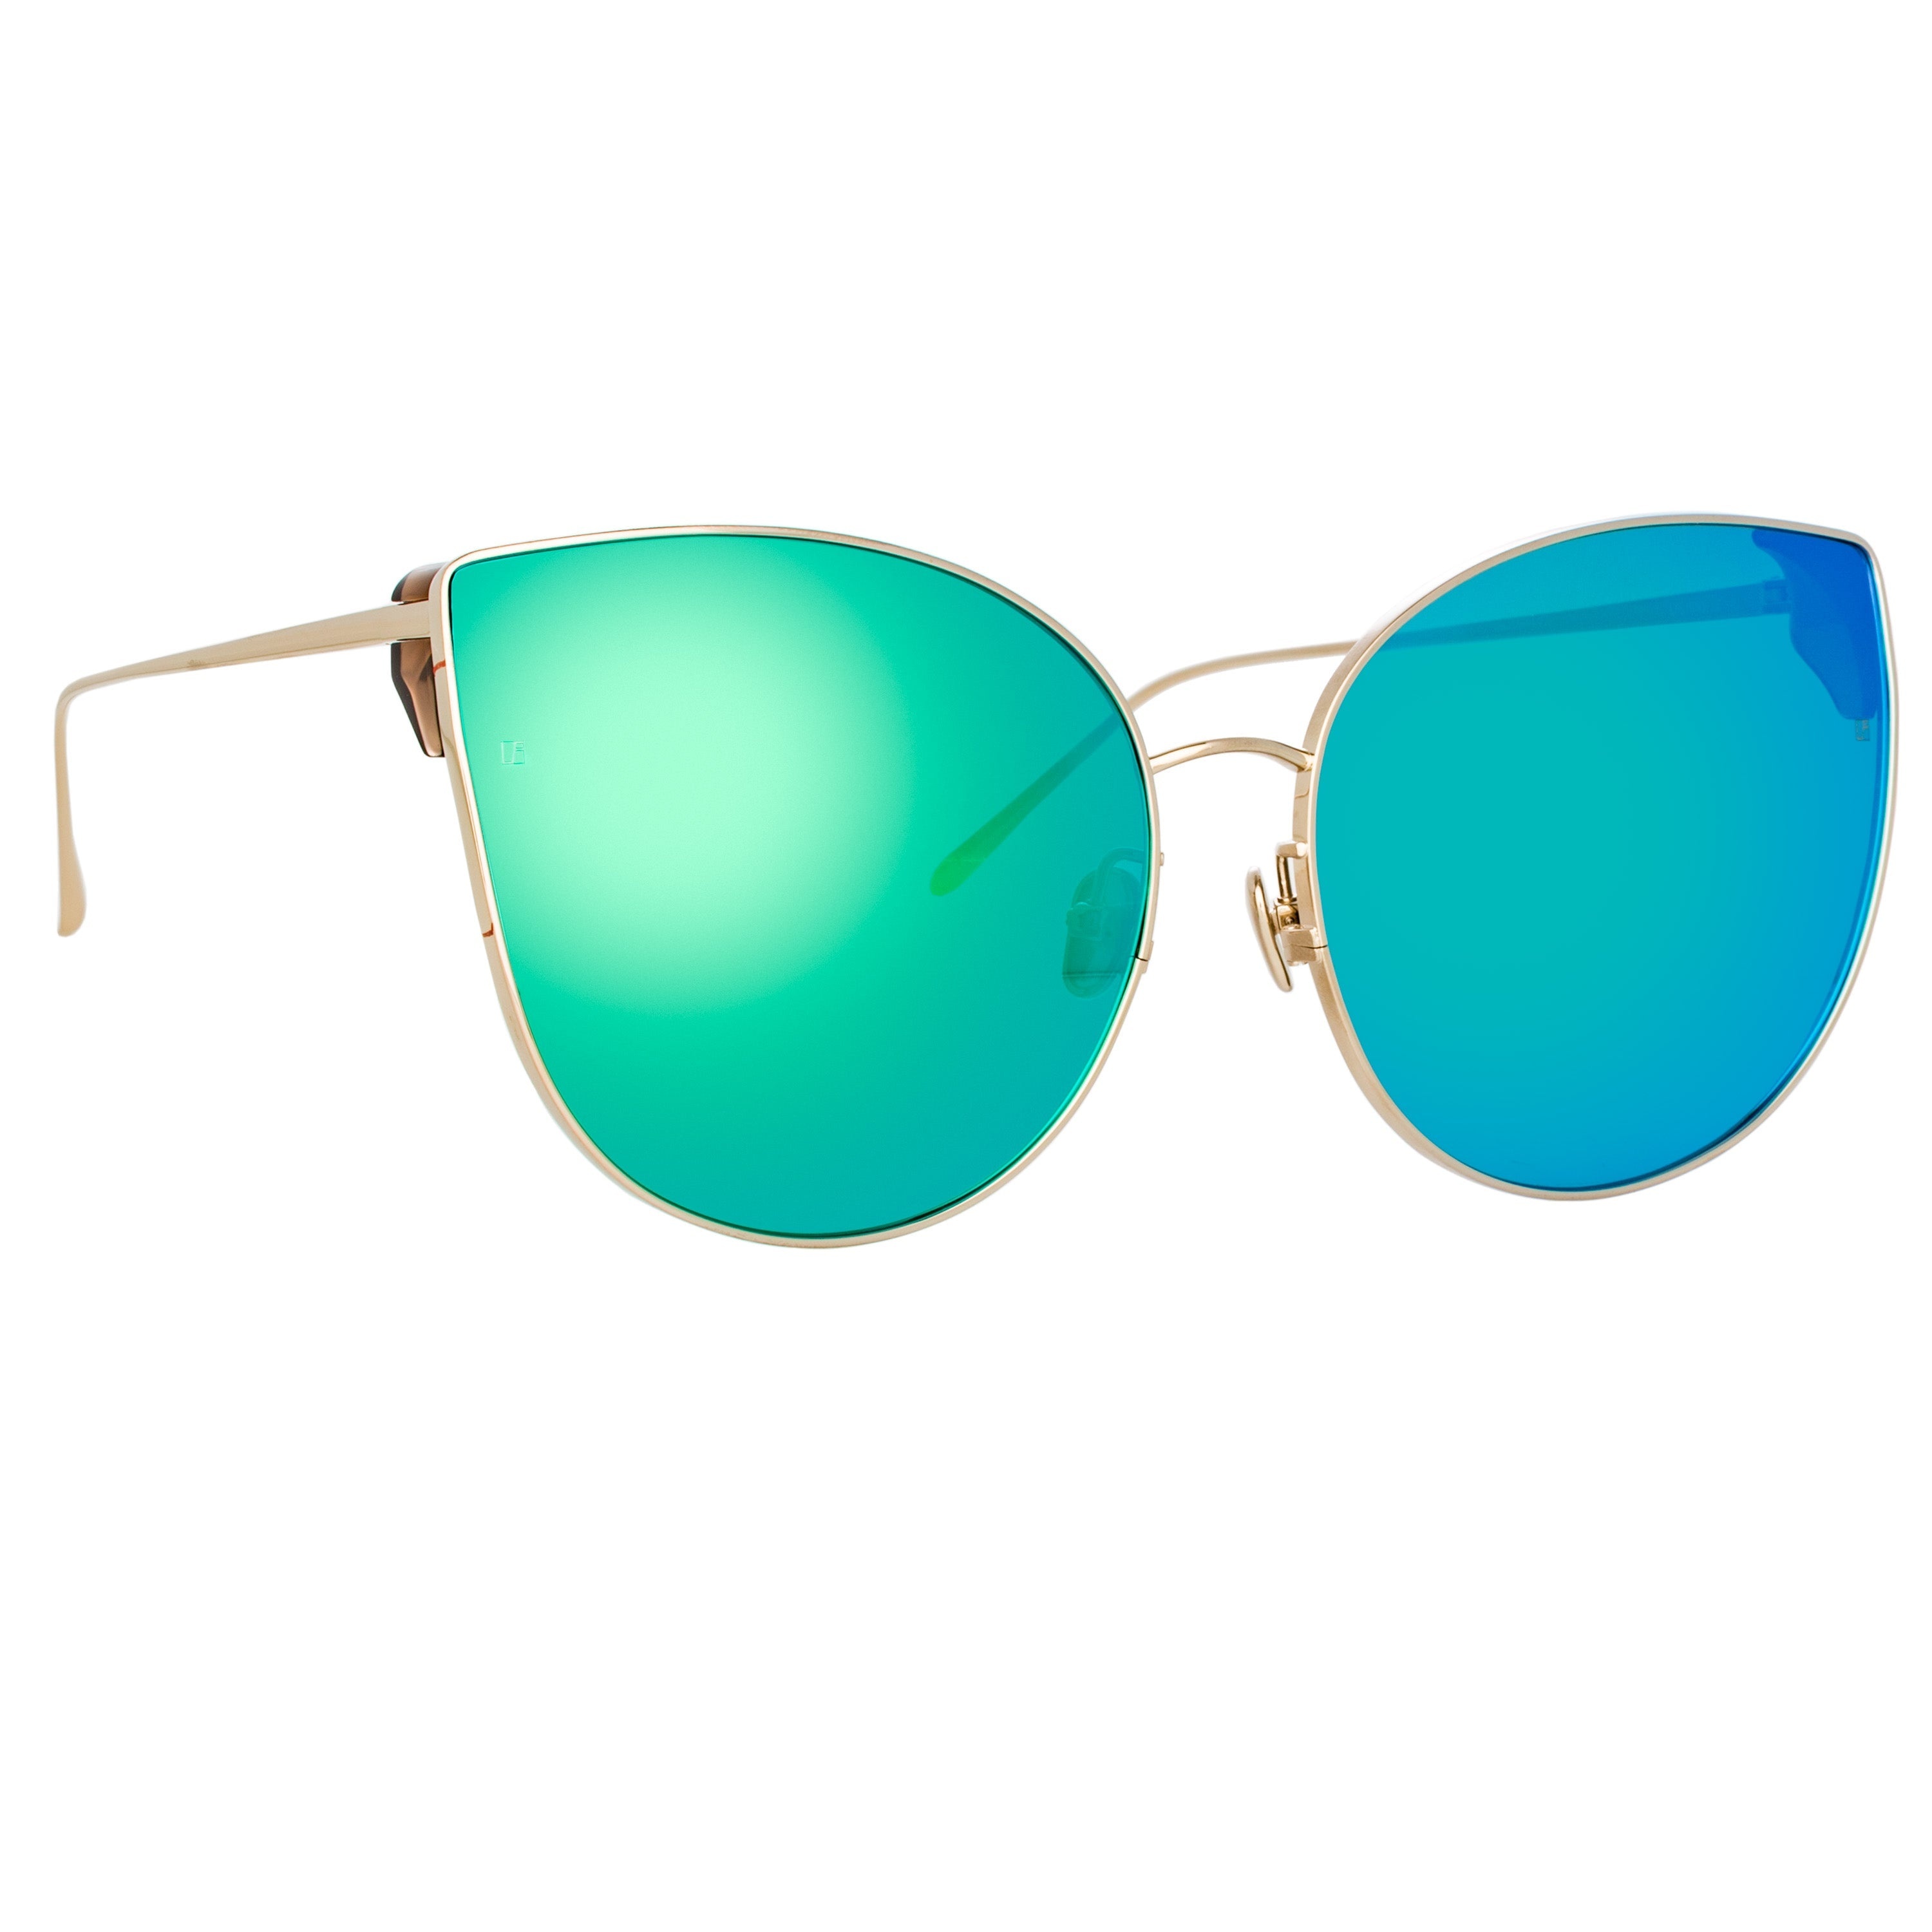 FLYER CAT EYE SUNGLASSES IN LIGHT GOLD AND BLUE - 2